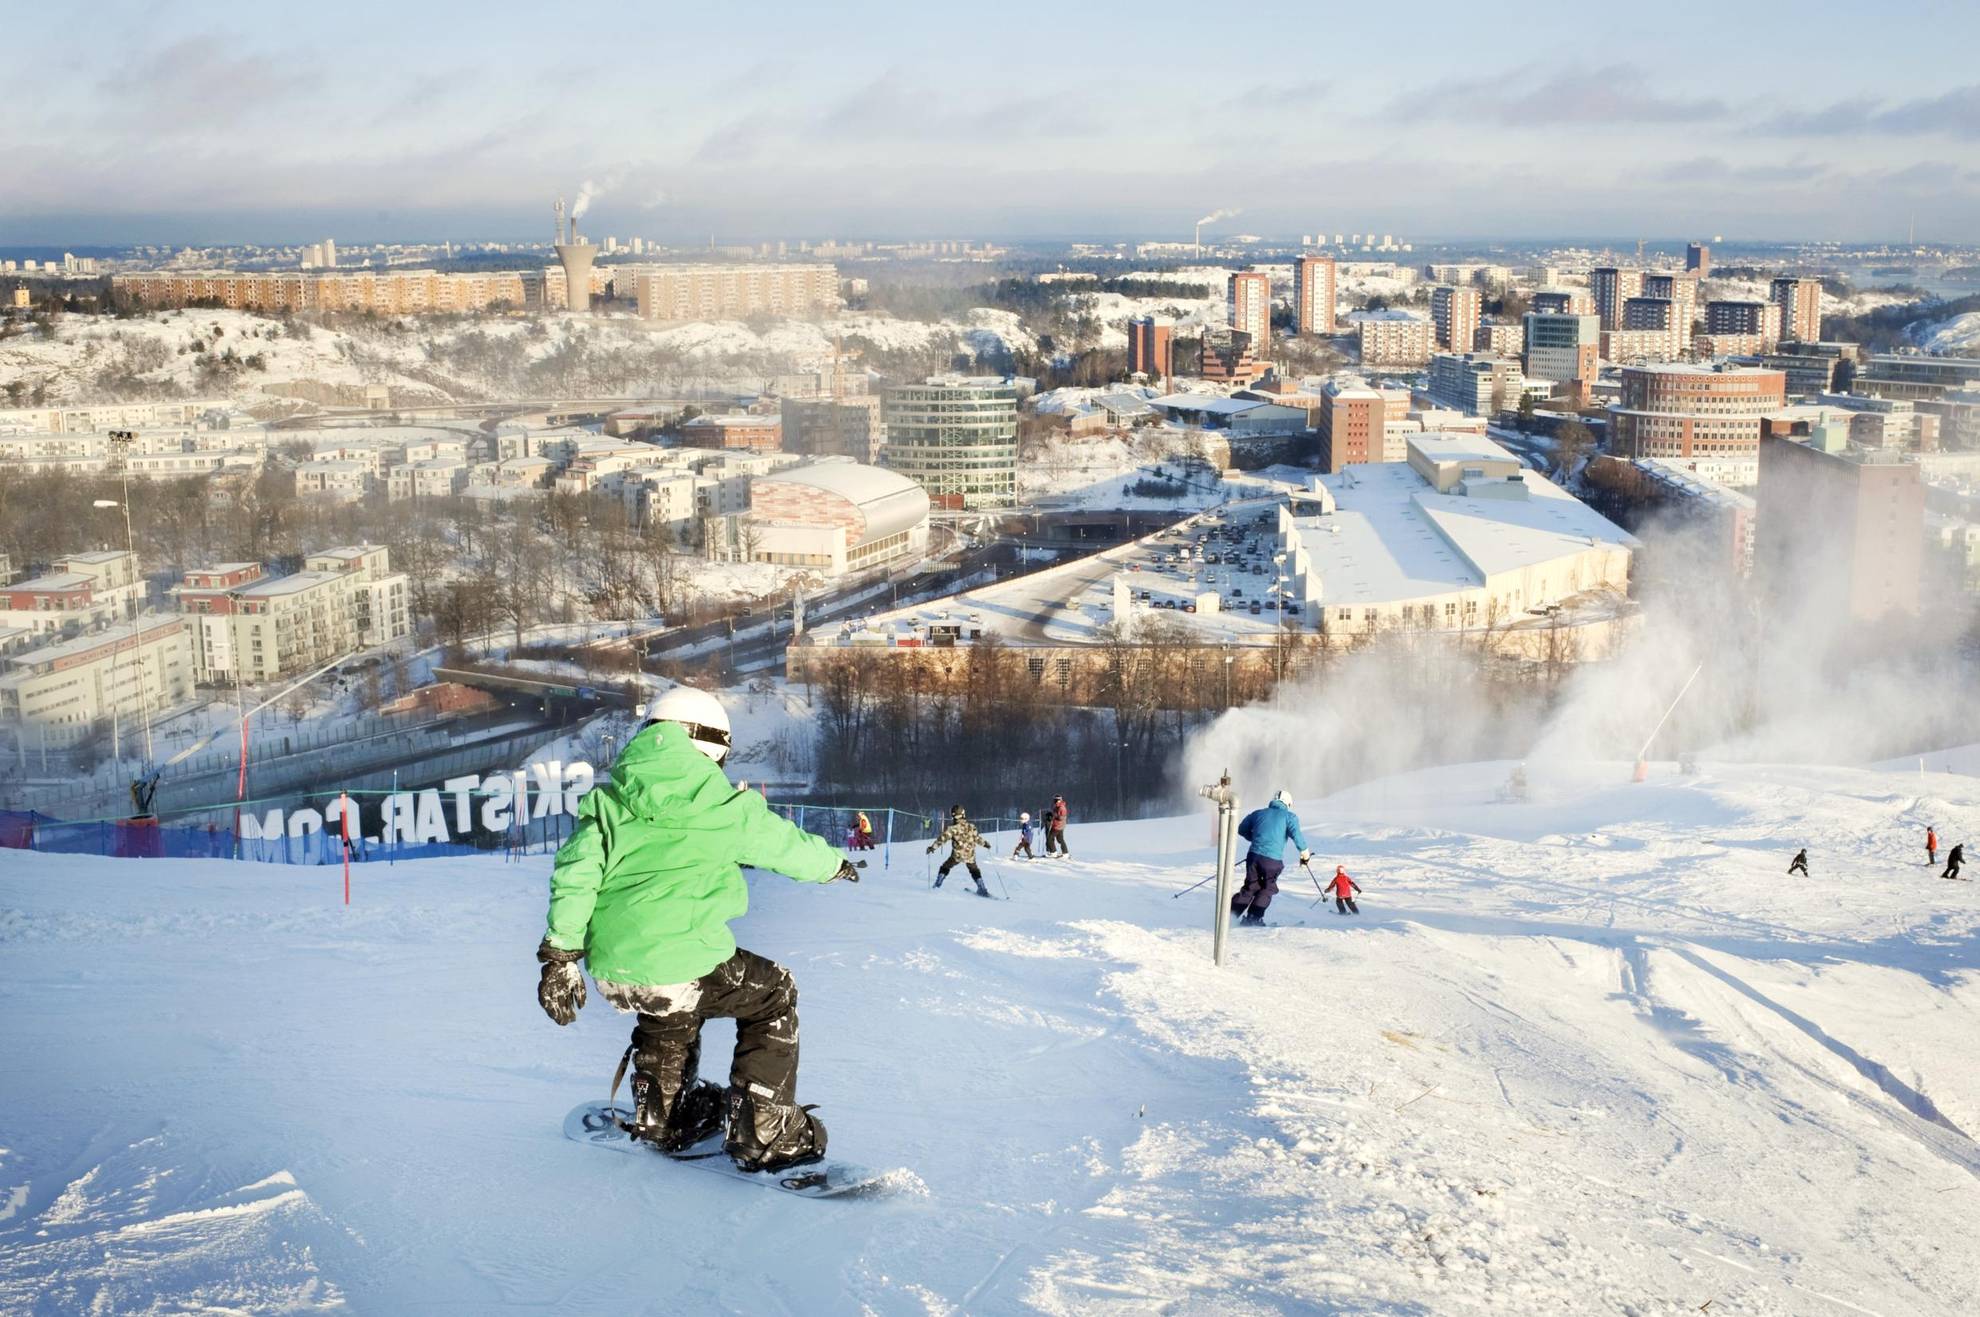 People are going down the slopes of Hammarbybacken on skis and snowboards, looking out over downtown Stockholm.